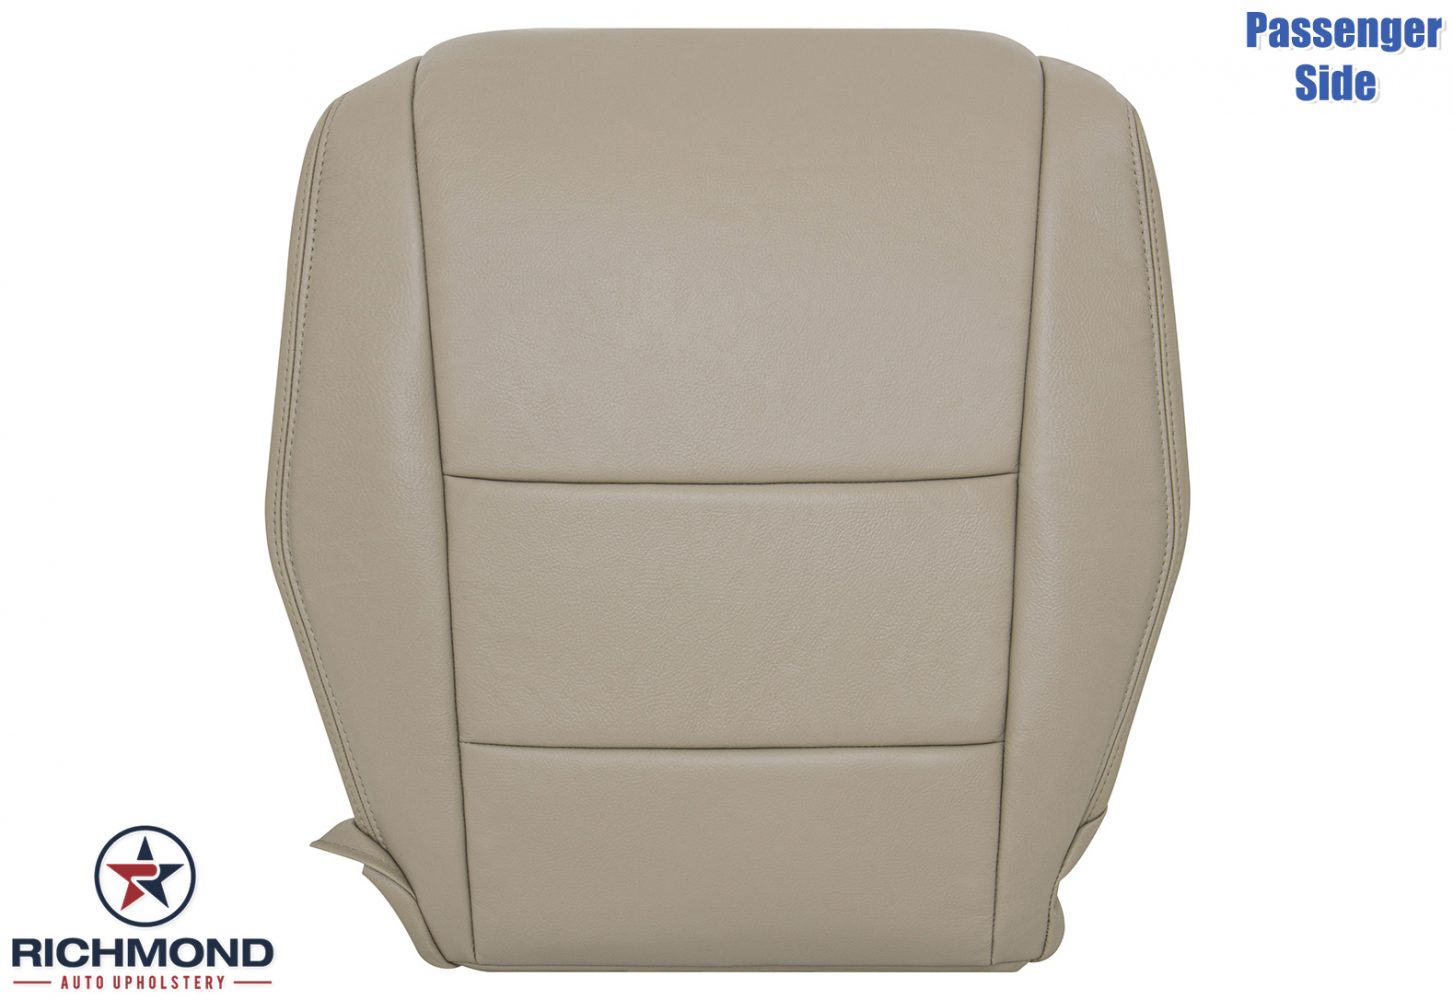 2008-2012 Honda Accord 4-Door Replacement Leather Seat Cover: Passenger  Side Bottom, Tan